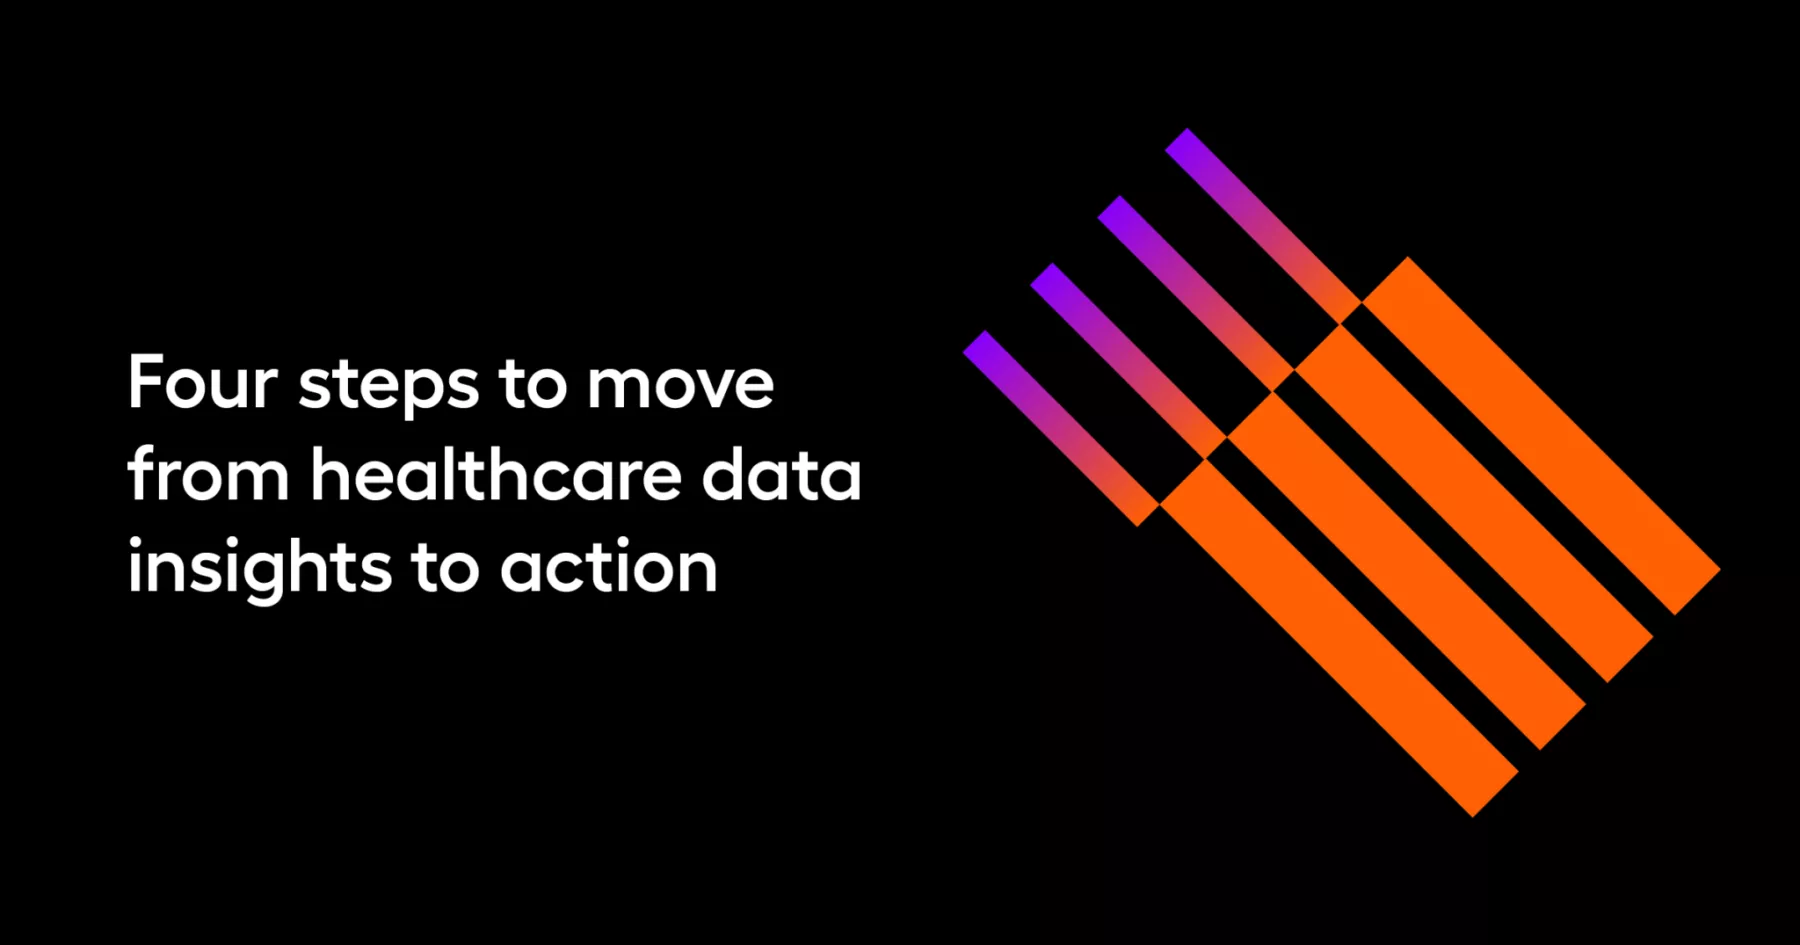 Four steps to move from healthcare data insights to action